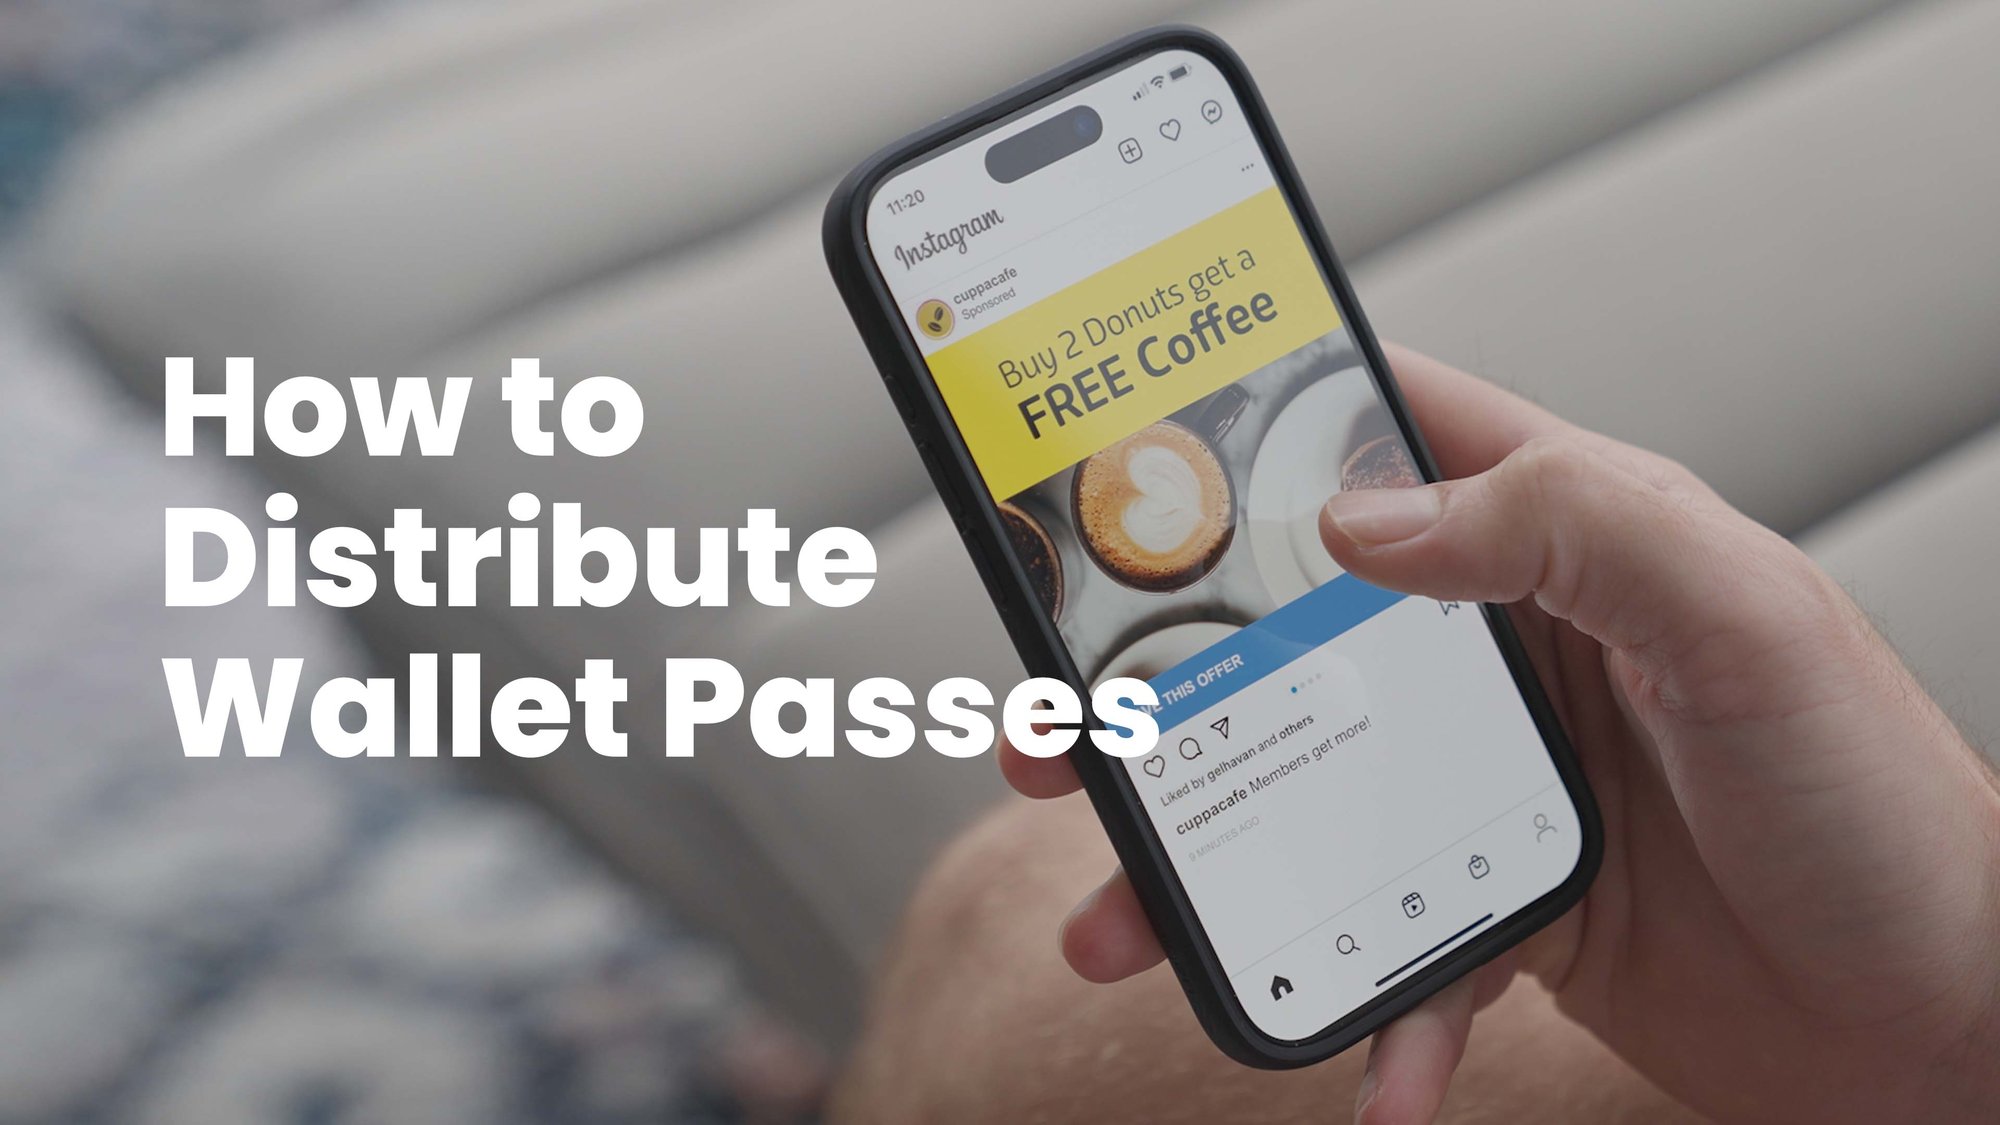 How to Distribute Wallet Passes